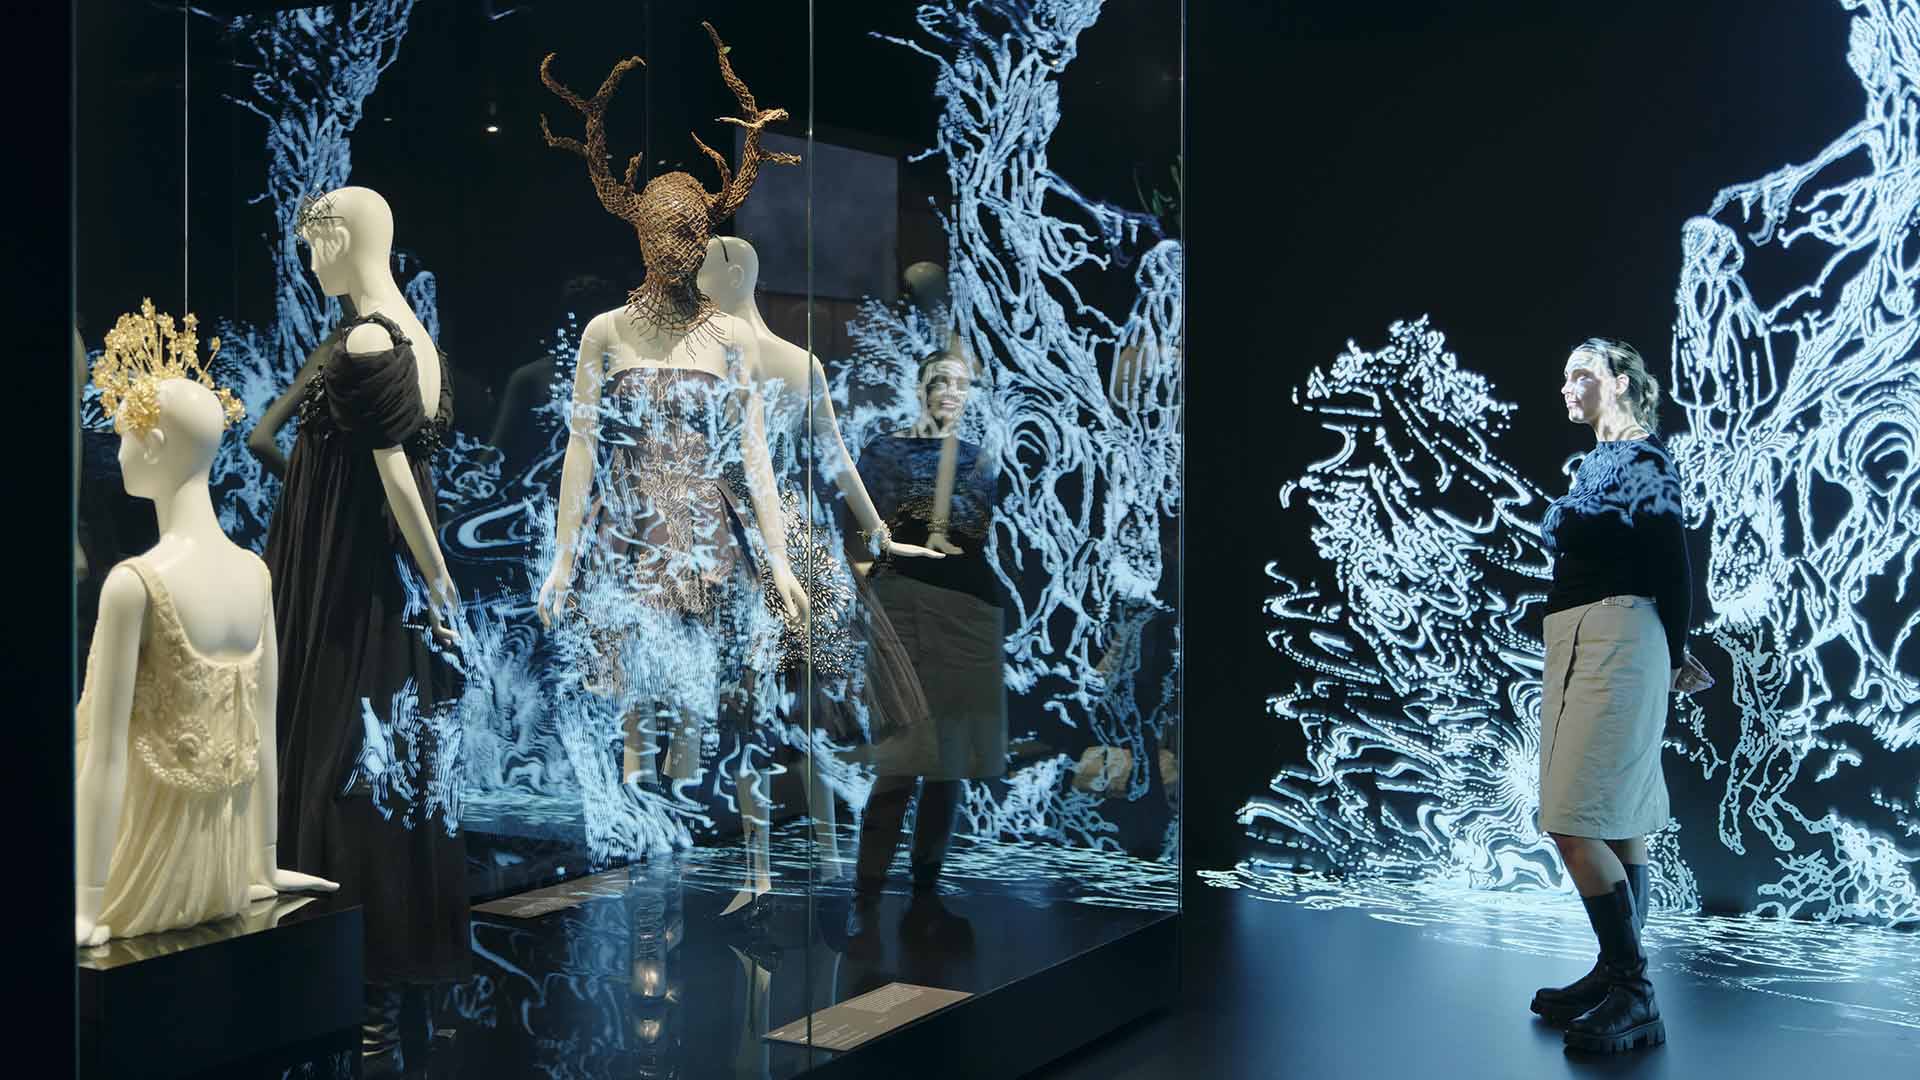 Now Open: A Blockbuster Alexander McQueen Exhibition Featuring 120-Plus Garments Has Arrived in Australia